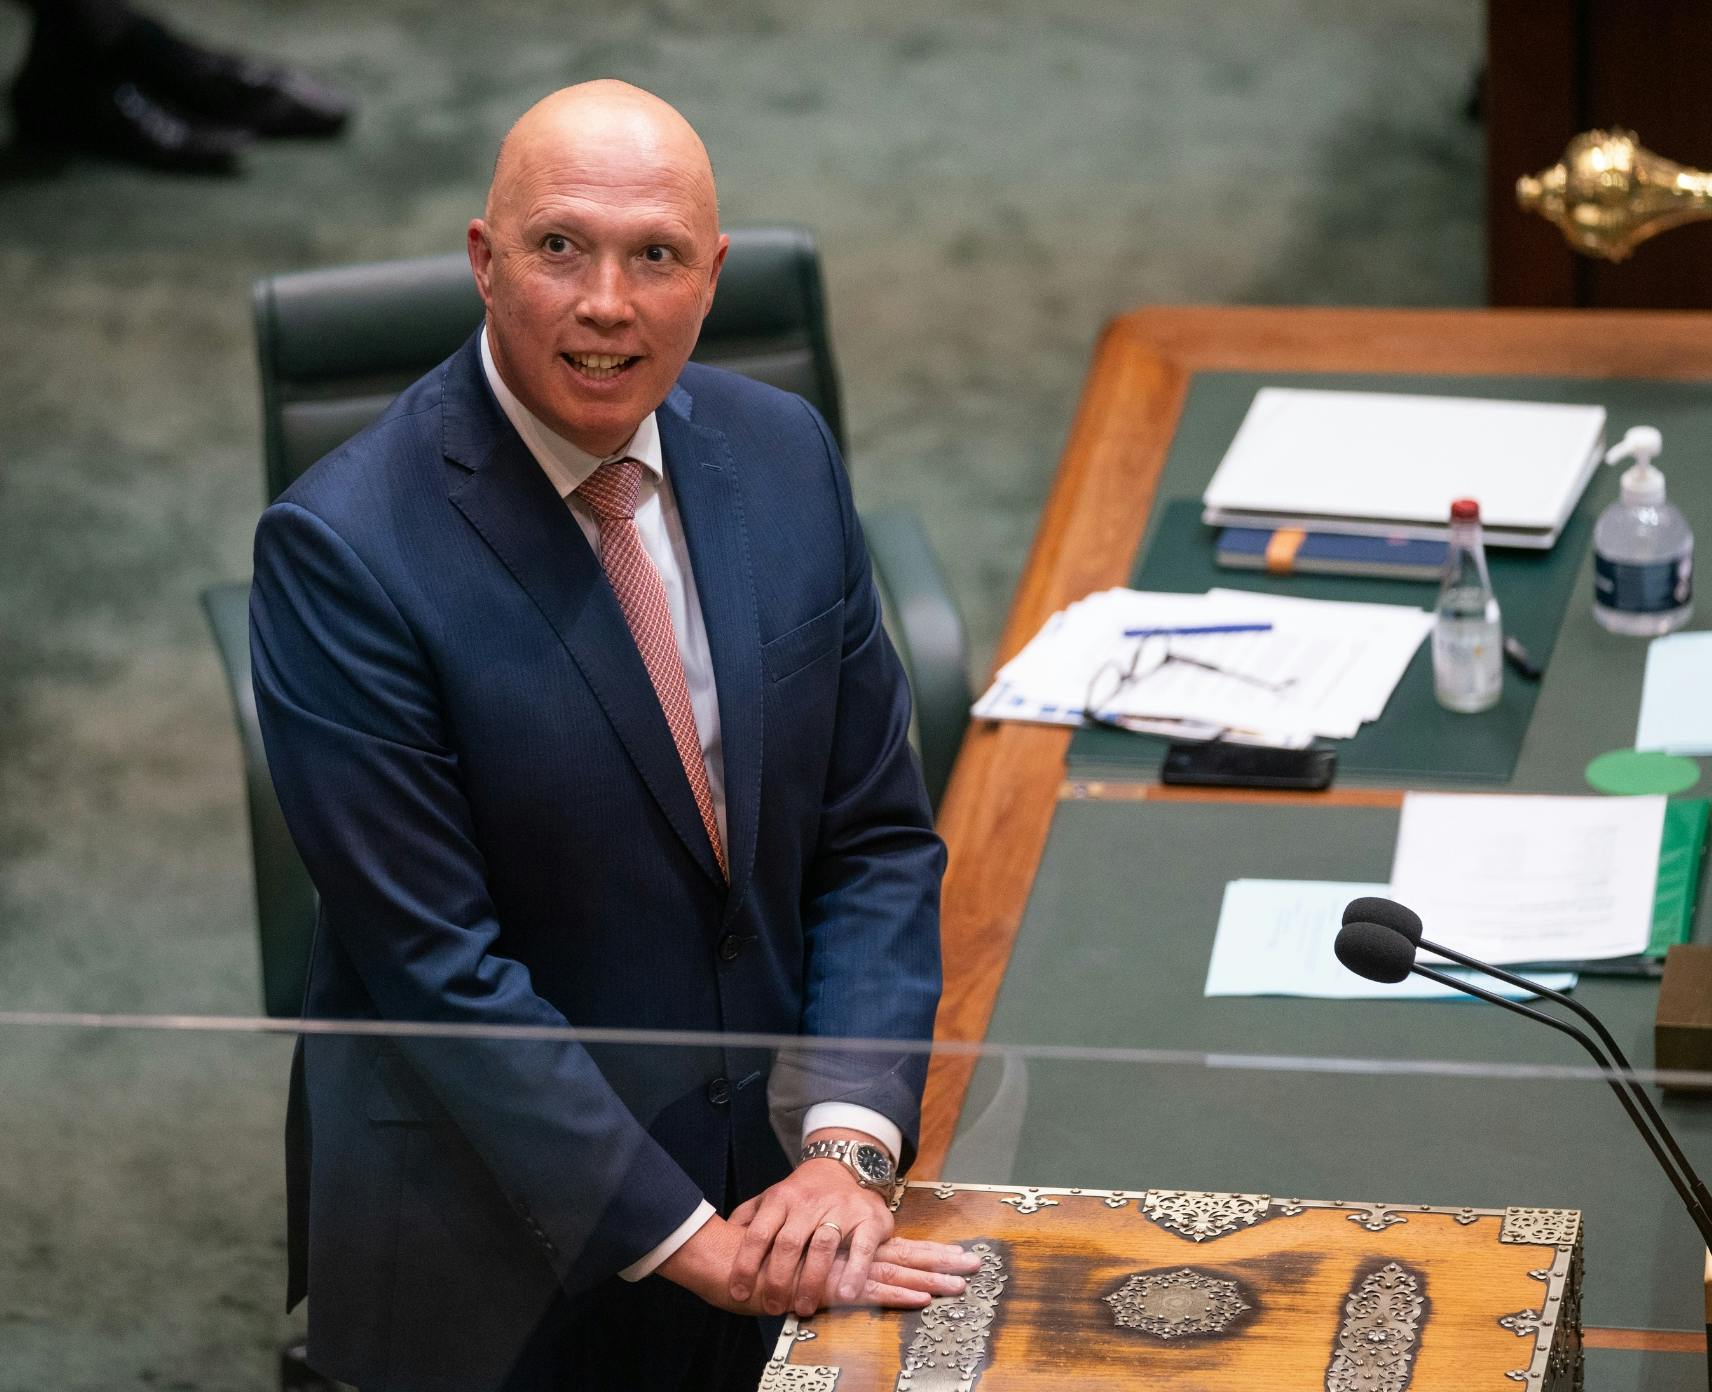 Peter Dutton speaks in the House of Representatives at Parliament House in Canberra